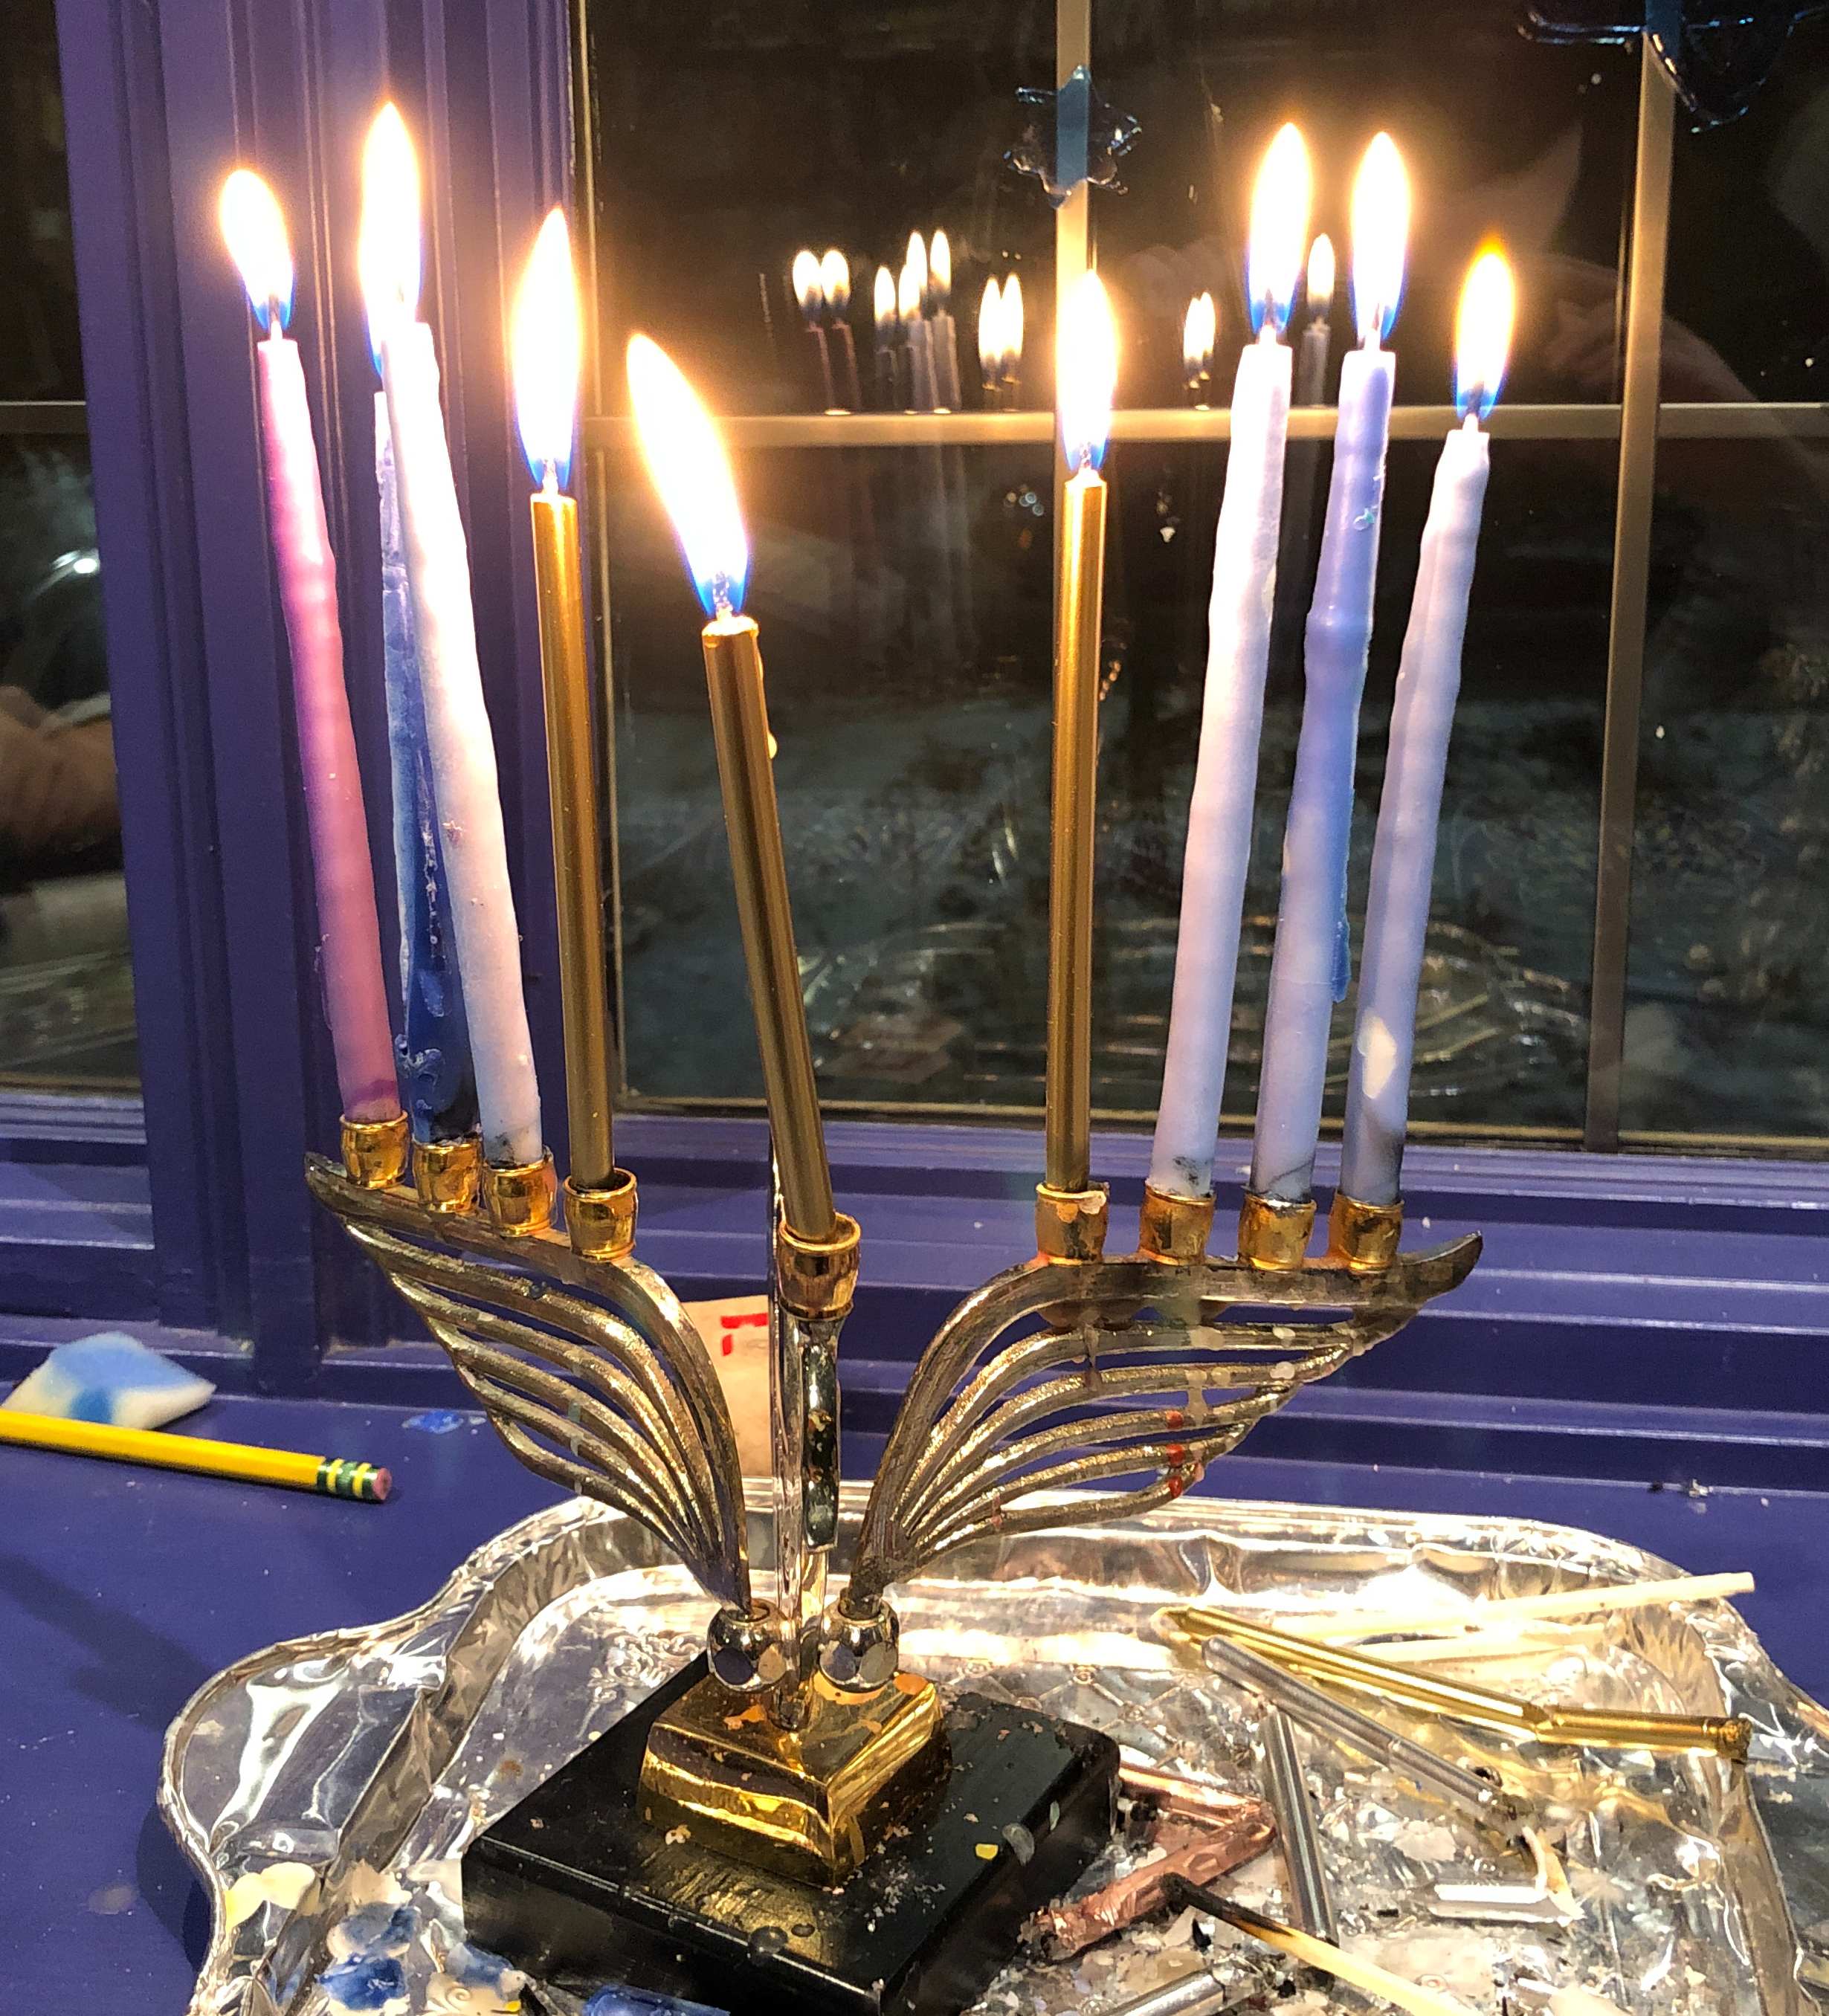 A dove-shaped hannukah menorah with all eight candles lit.